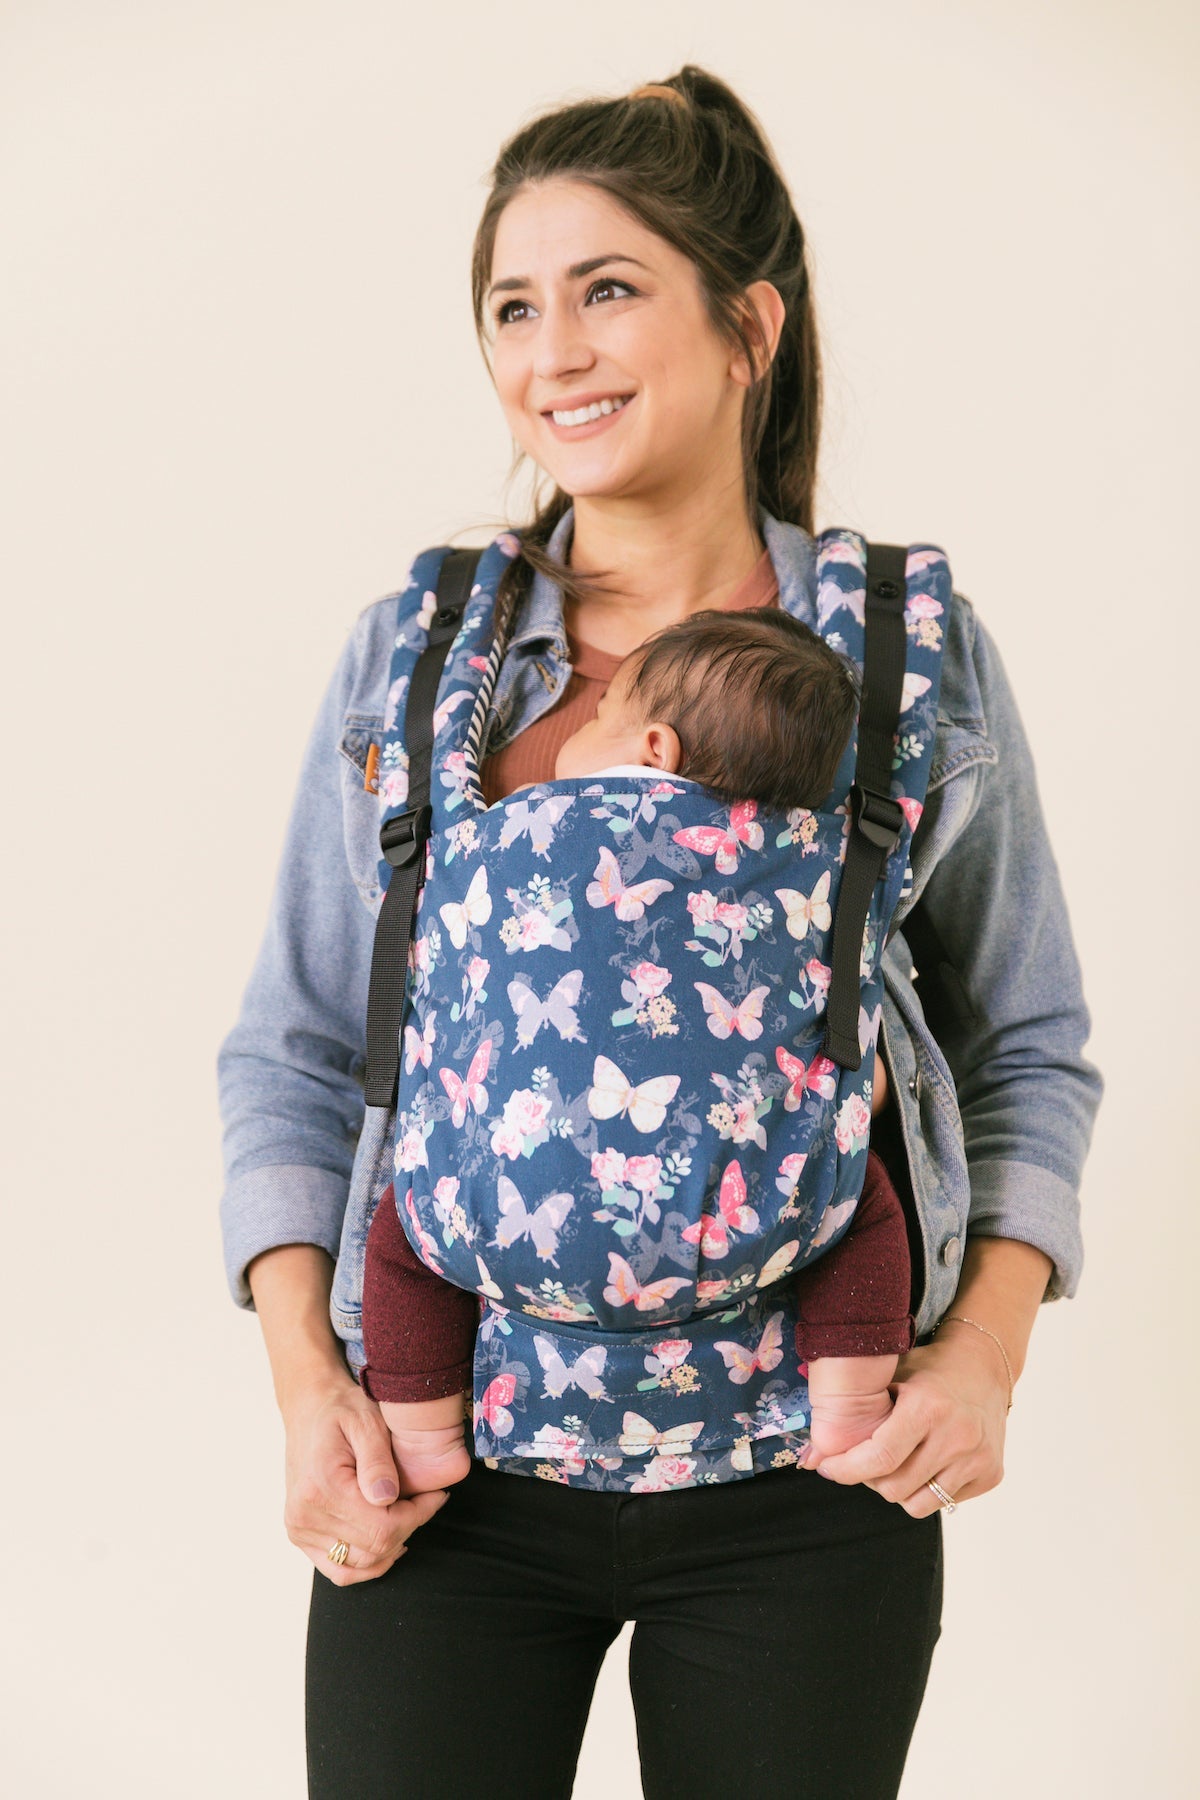 tula butterfly carrier